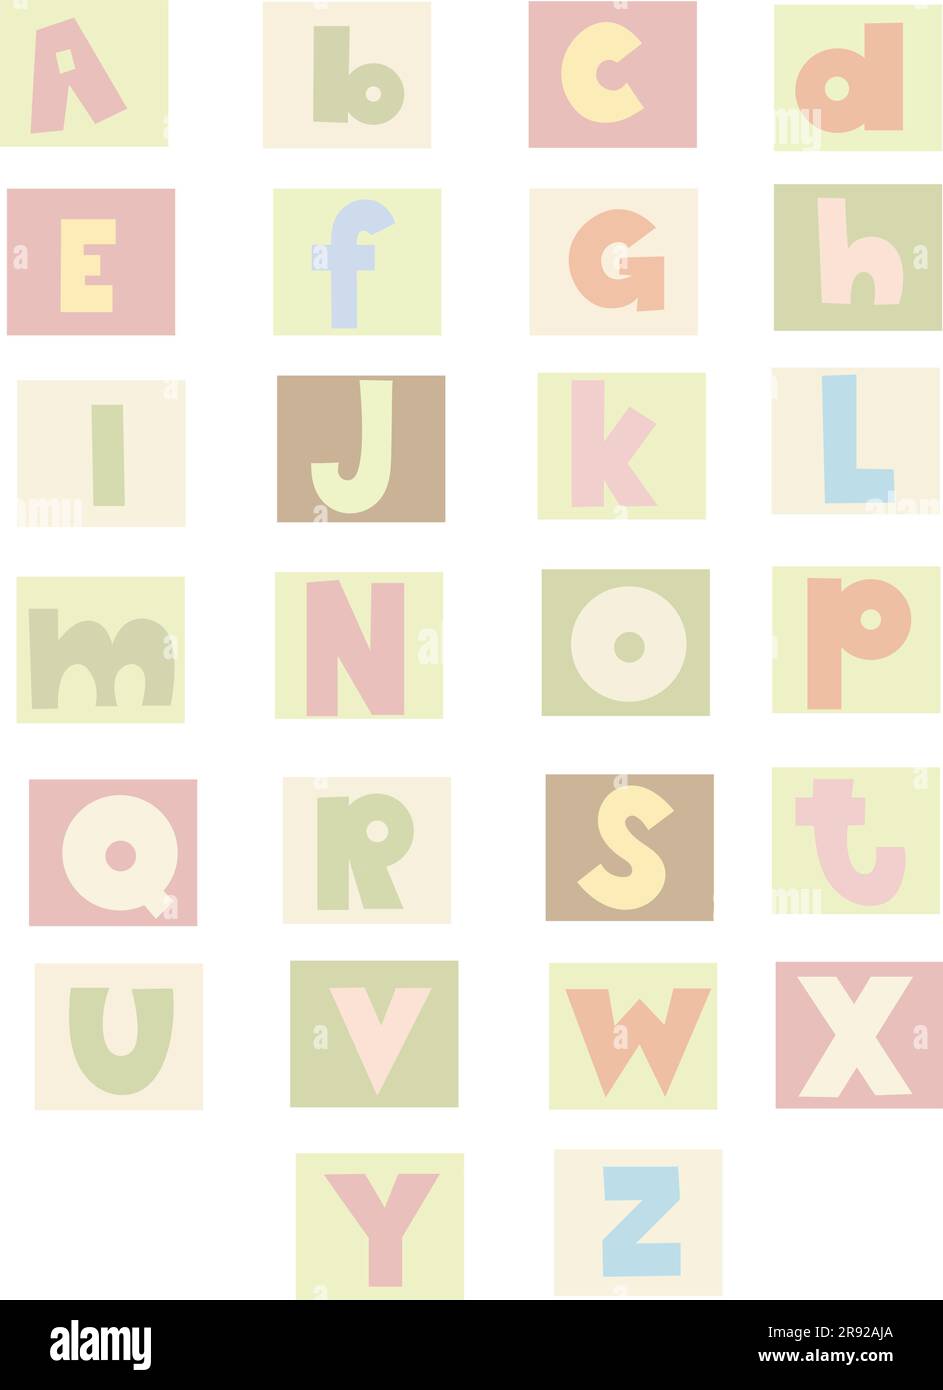 English alphabet for kids to help learning and education in